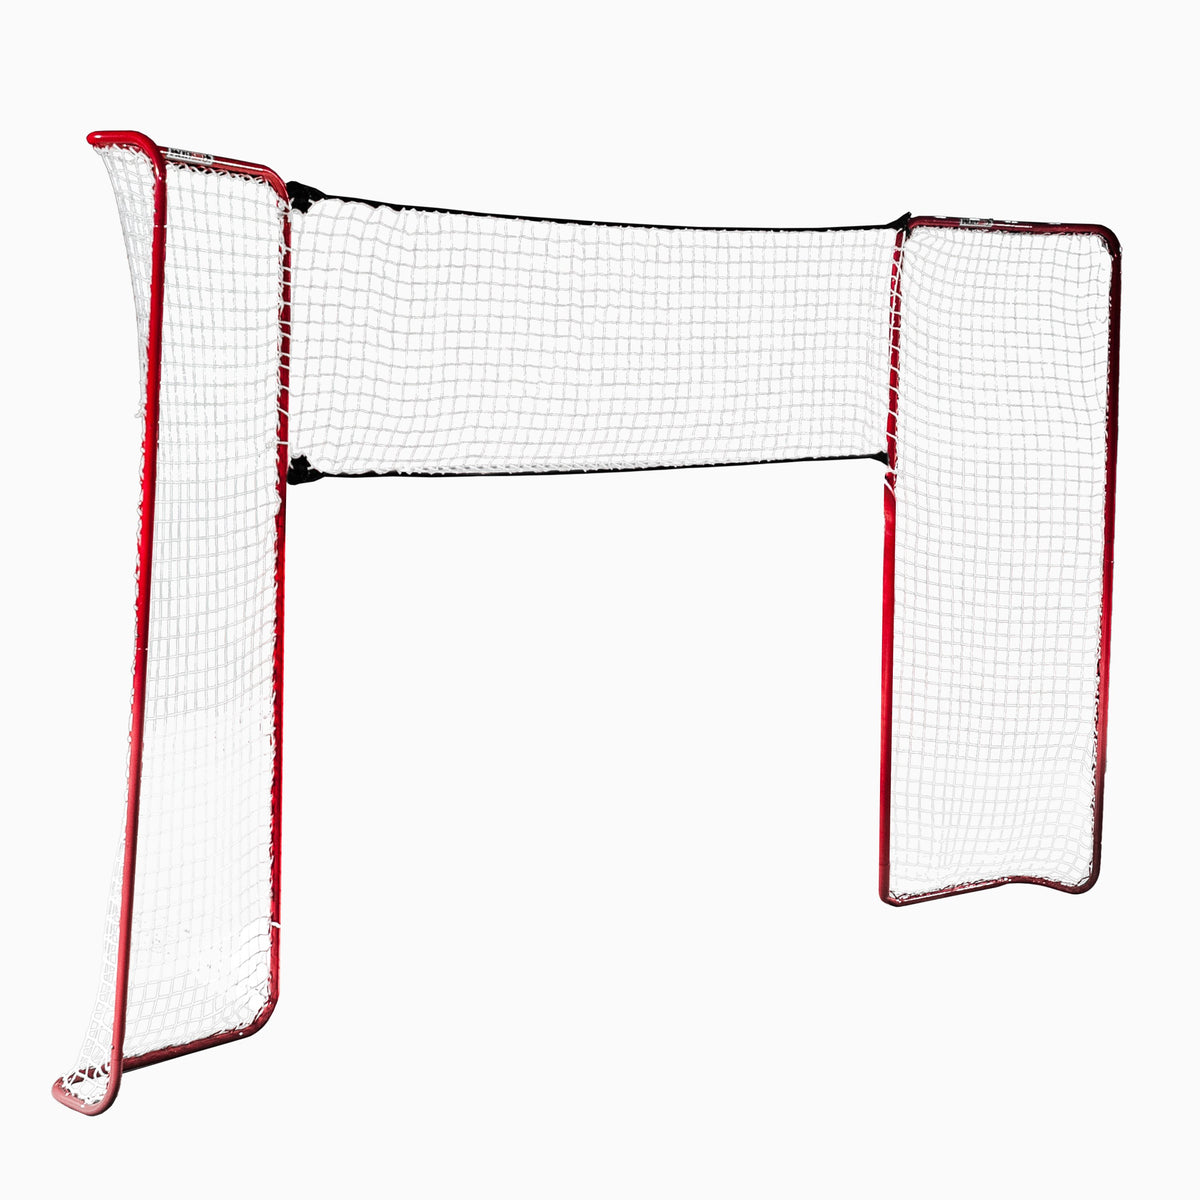 2D Backstop Replacement Netting, Shooting Accessory